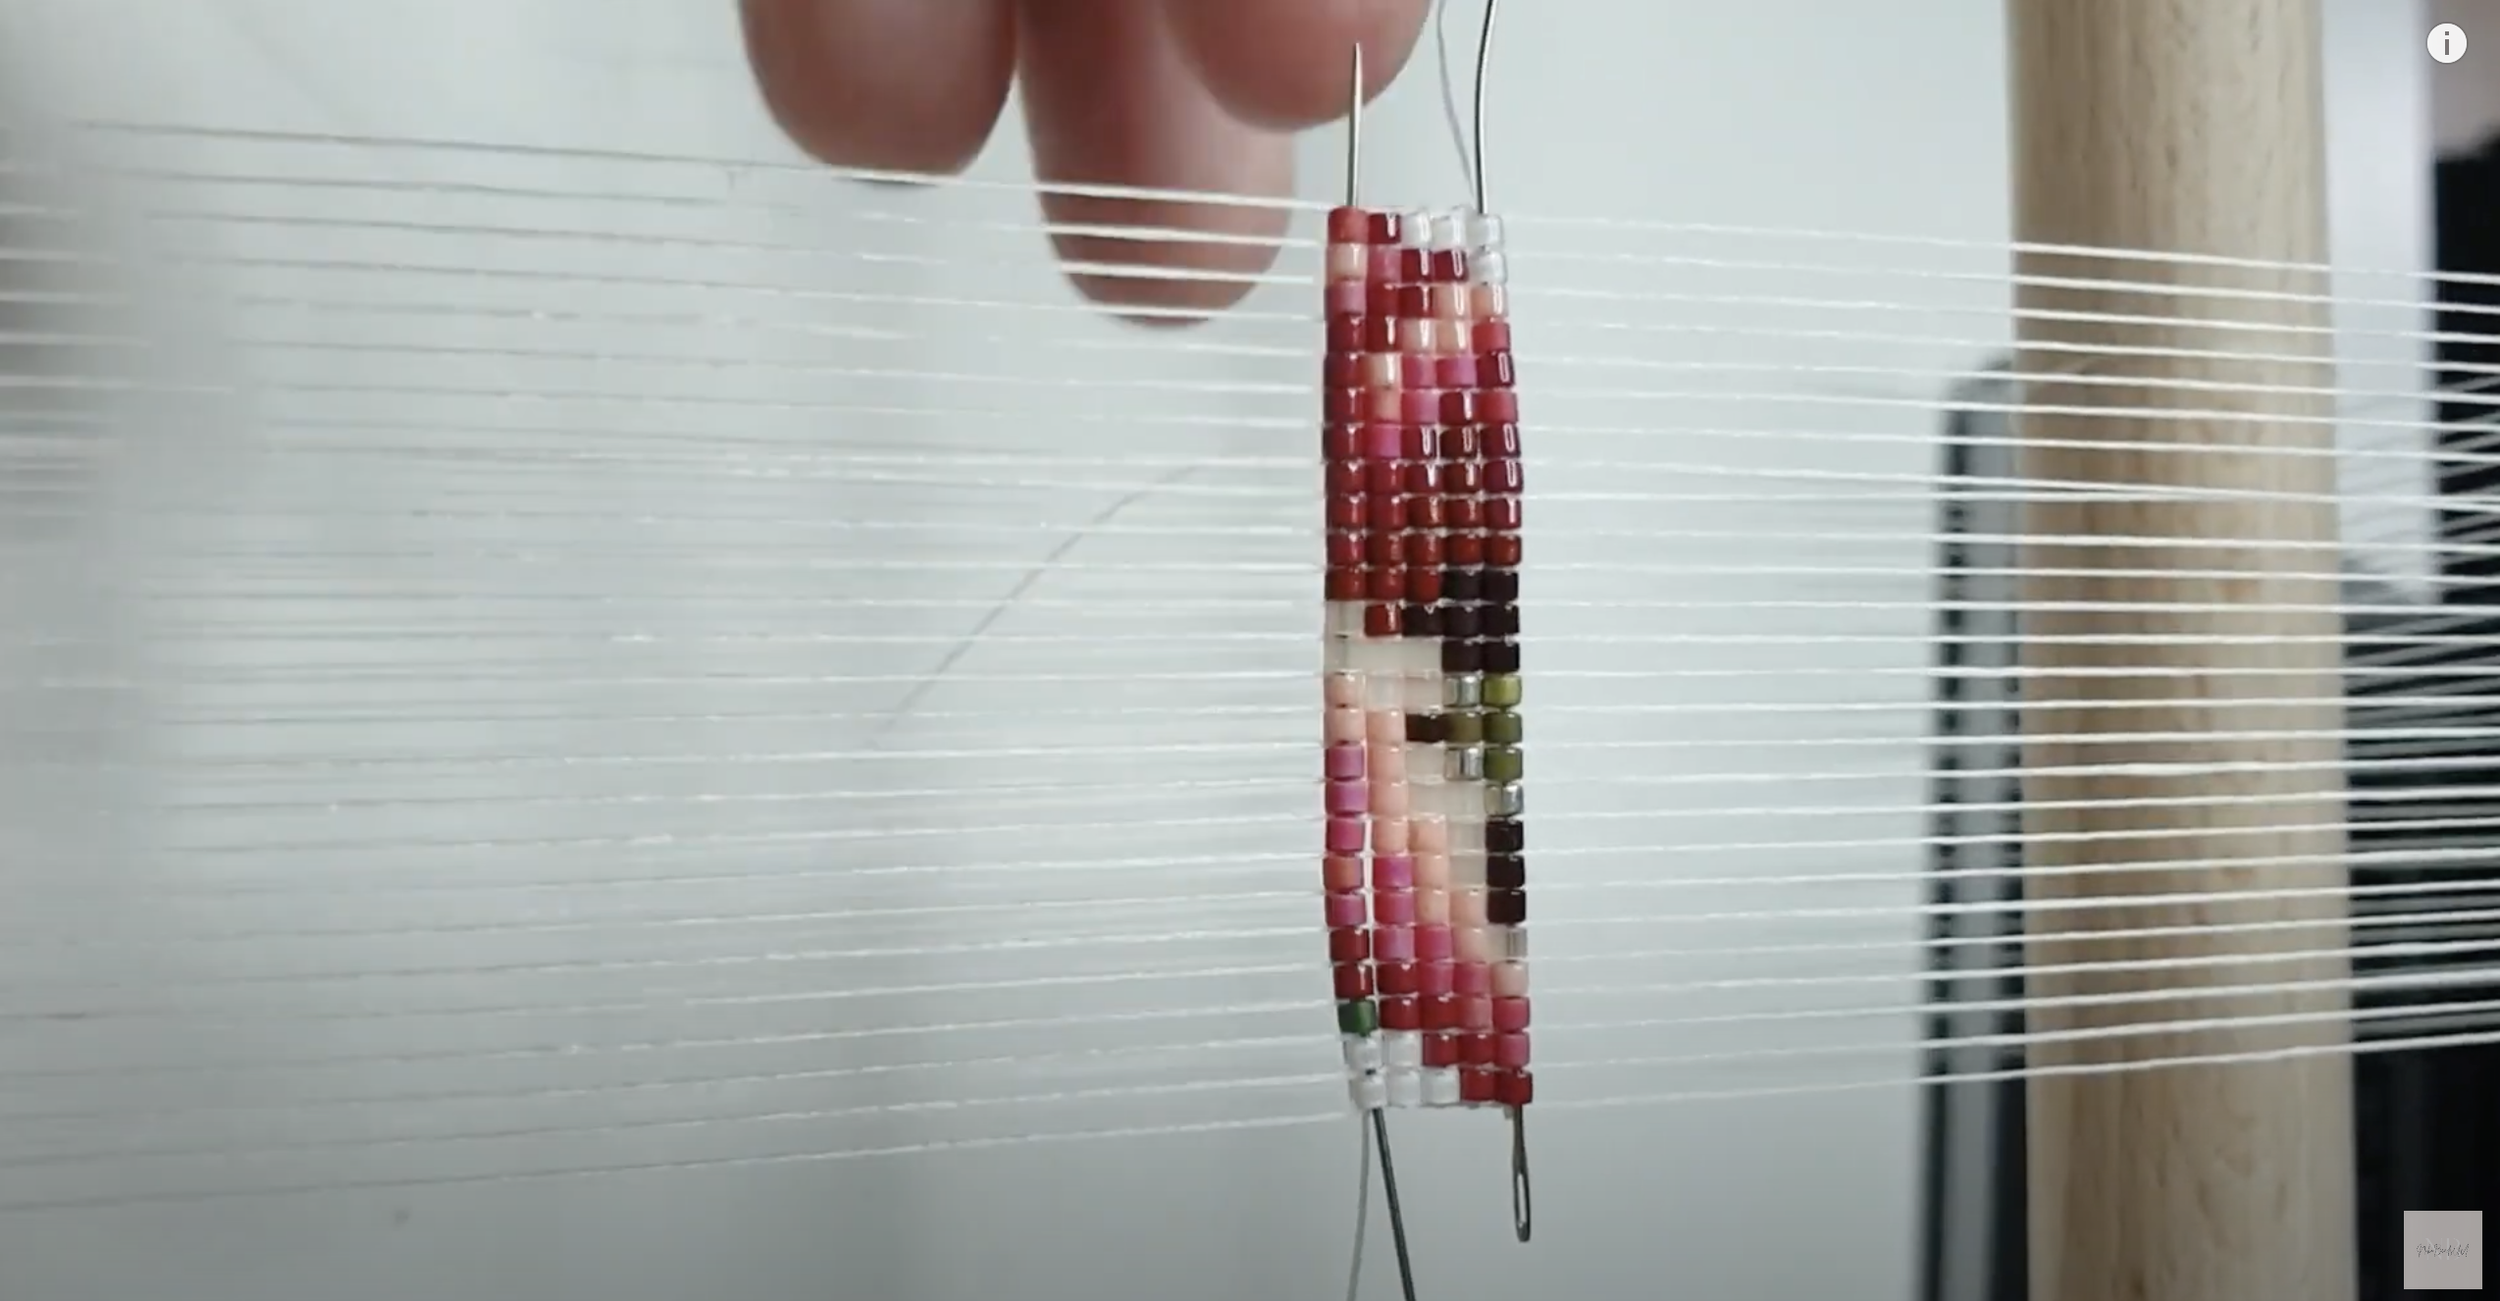 This is how you “catch” each bead between threads. Continue weaving back and forth, following the pattern until you have completed your bracelet.